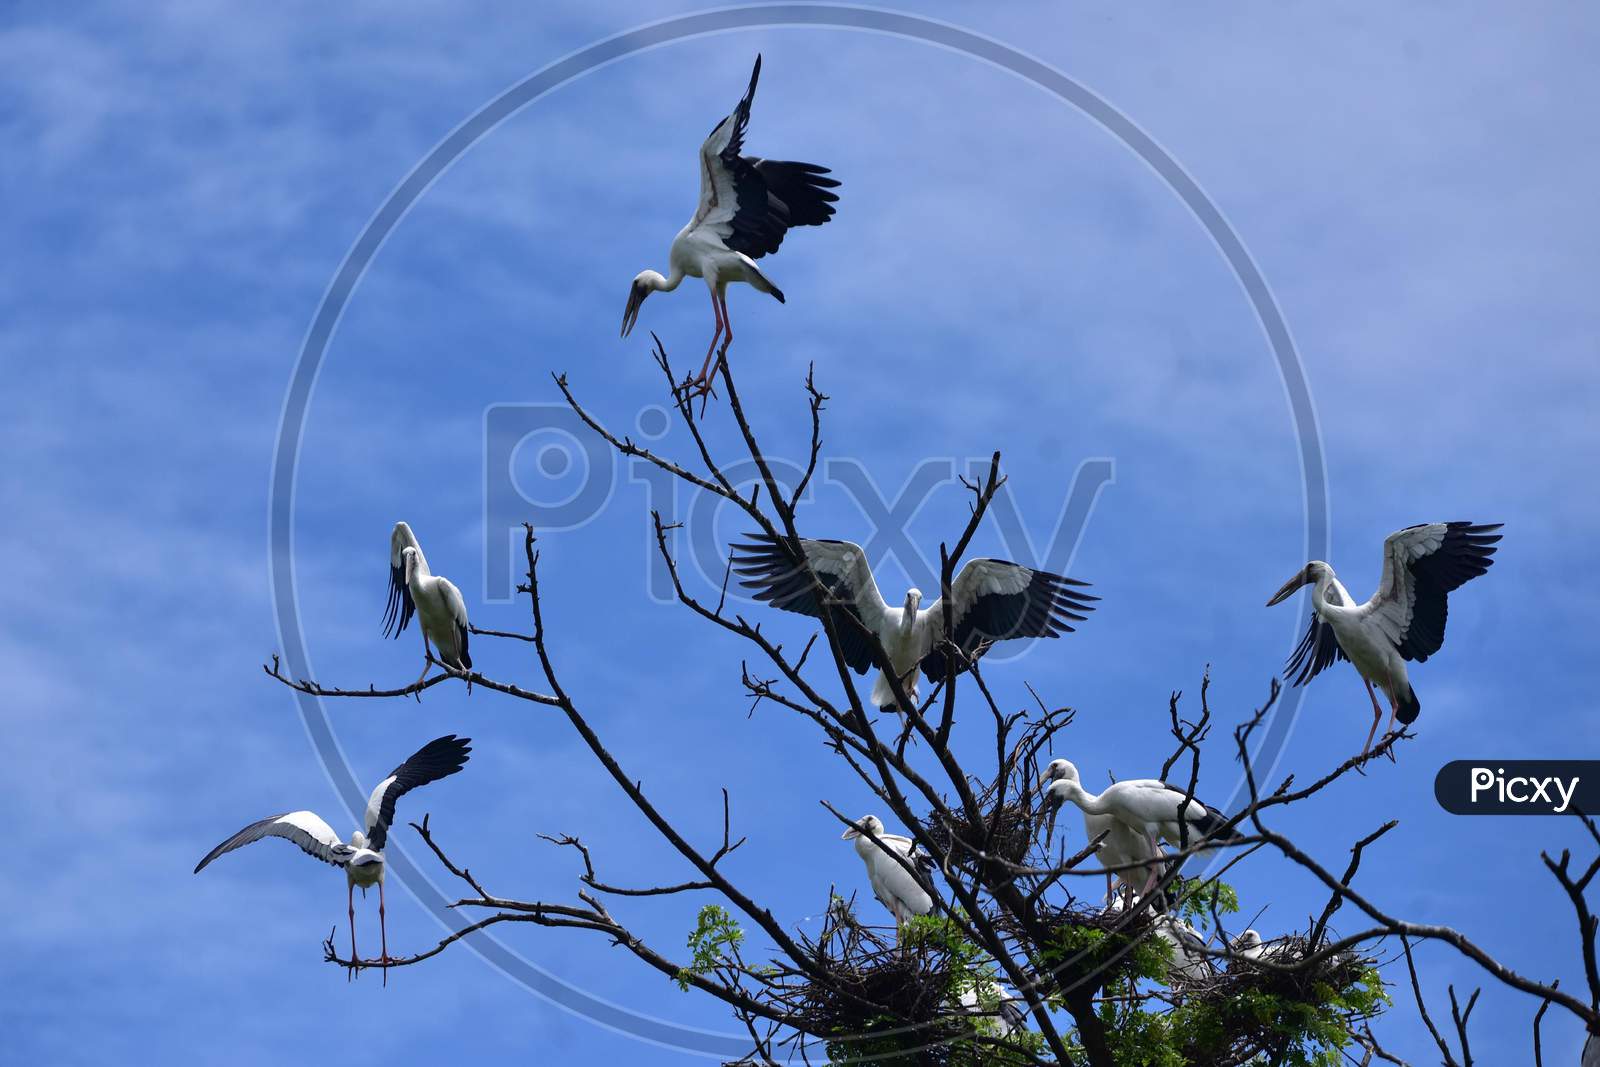 Openbill Storks Are Seen Perched On Top Of A Tree As They Arrive To Nest And Breed During The Monsoon Season, In Nagaon District Of Assam On June 19, 2020